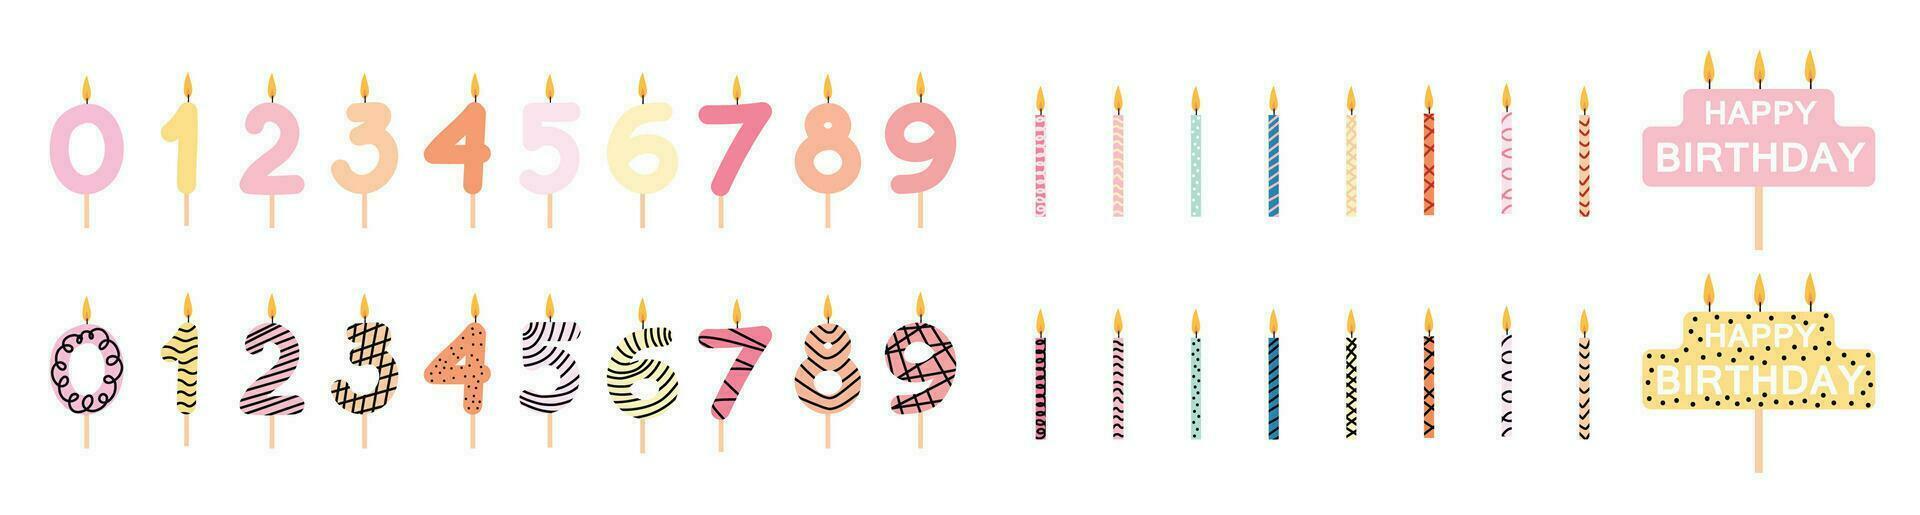 Big set of colorful birthday candles isolated on white background. Birthday candles in the shape of numbers. Burning colorful candles with decoration in flat style. Design elements for party, cards vector